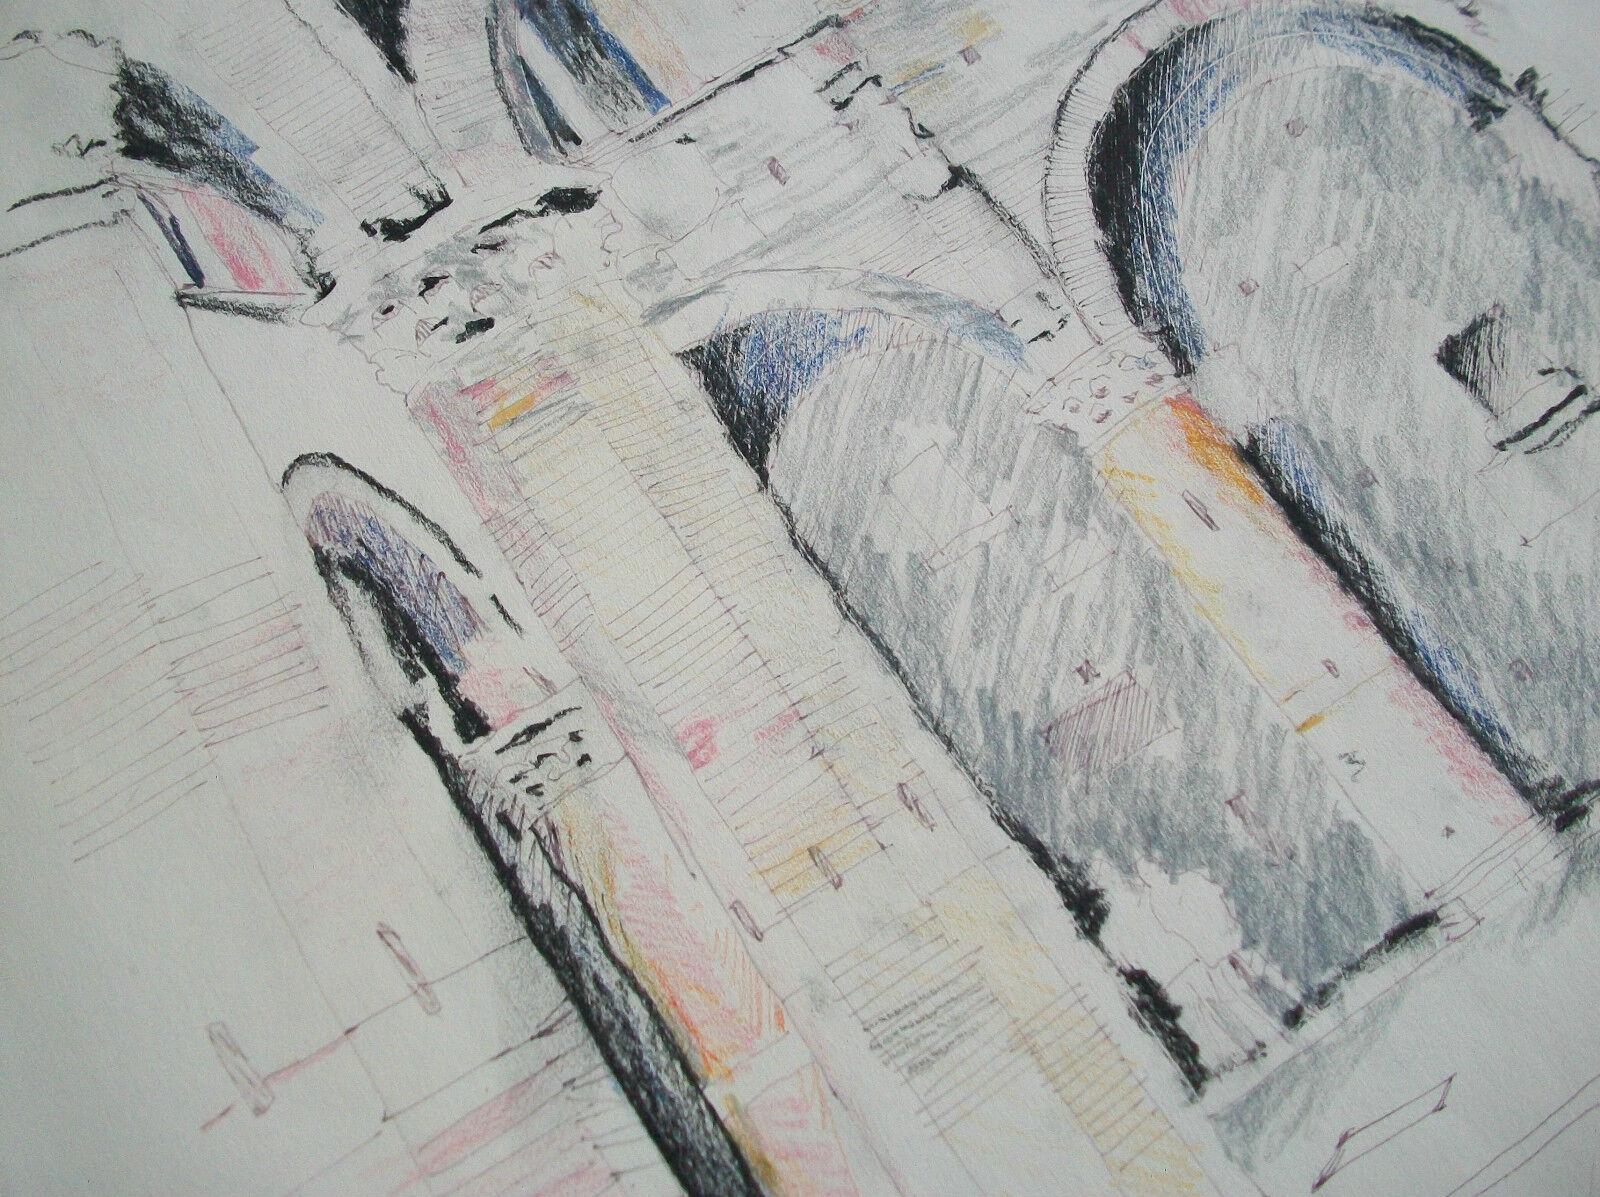 20th Century Italian Architectural Mixed Media Drawing on Paper - Signed - Unframed - C. 1984 For Sale